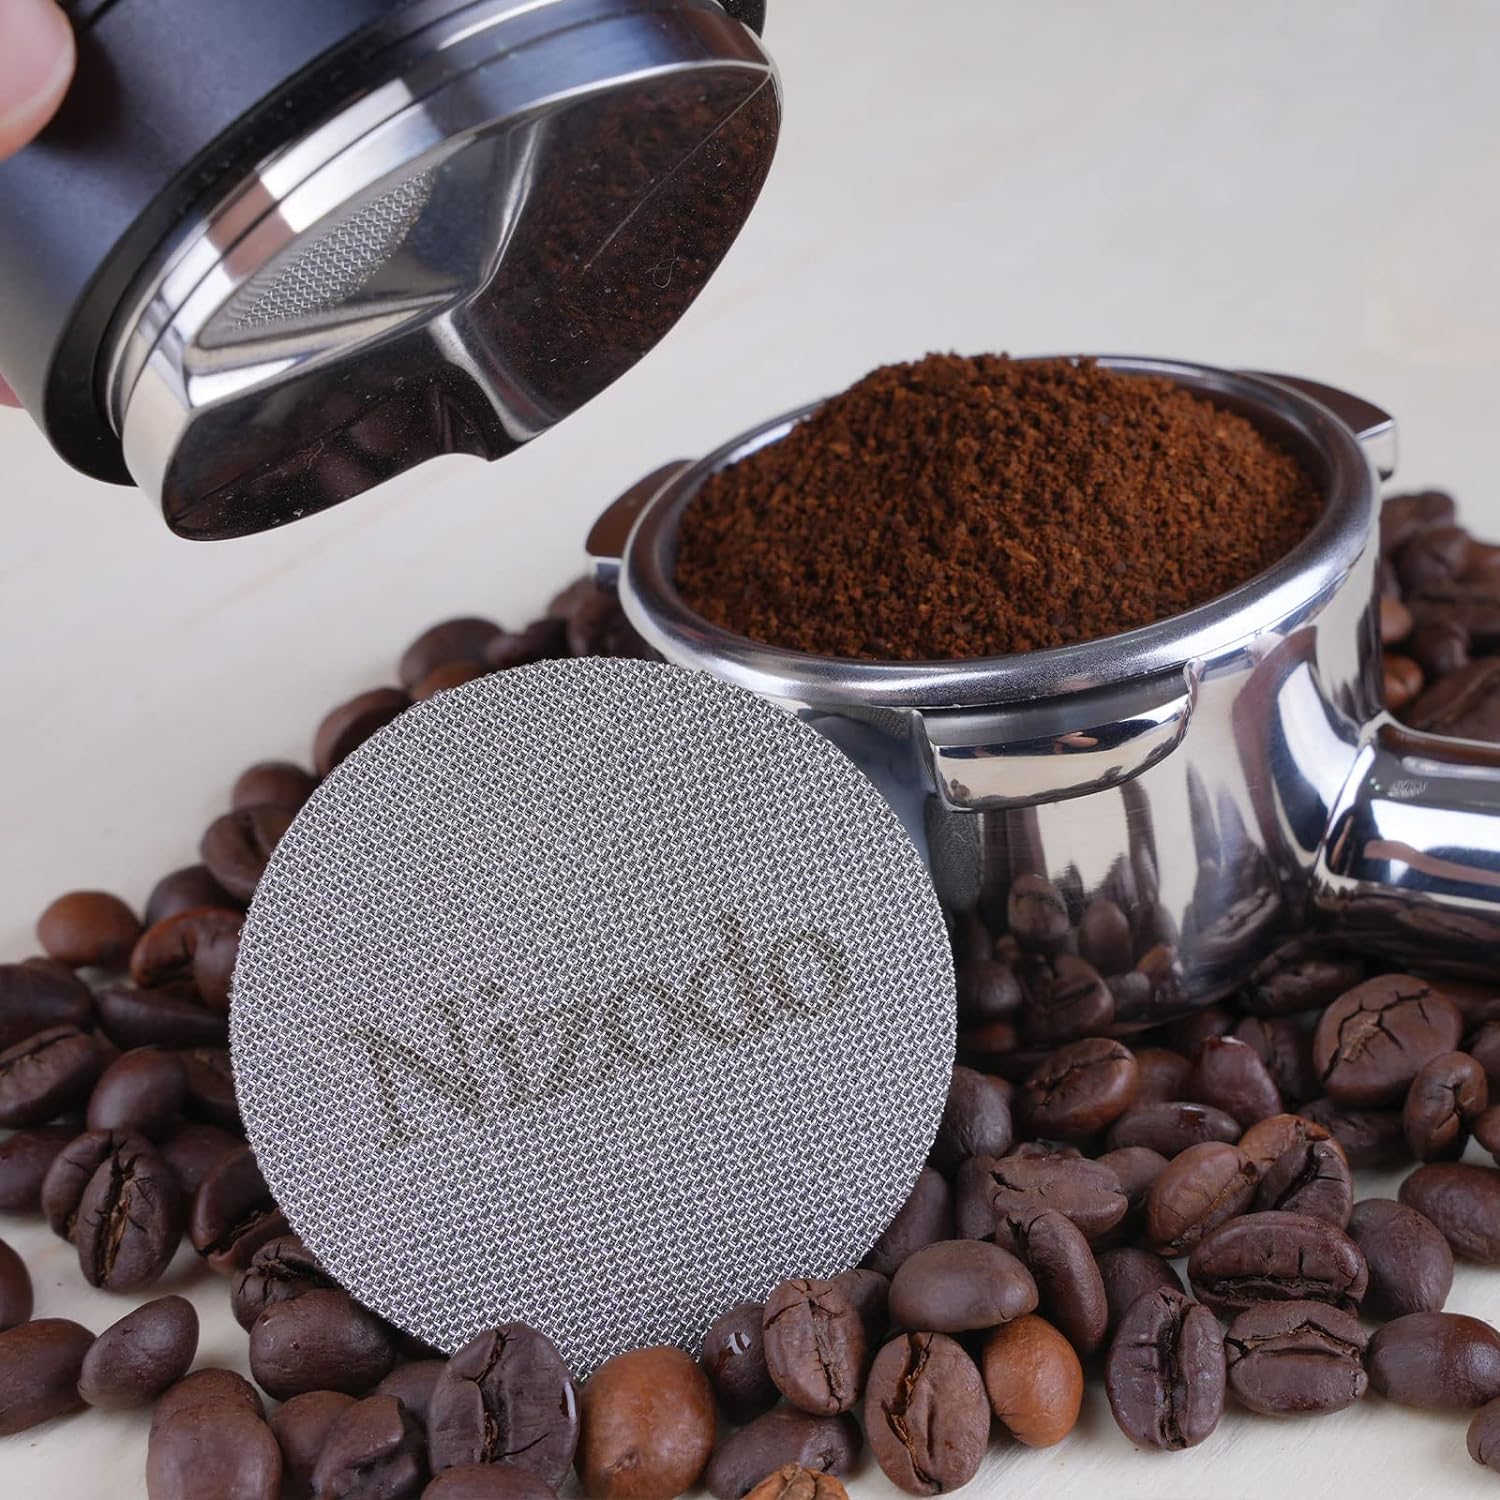 Espresso Coffee Tamper with Puck Screen, Nizodo 51mm Coffee Distributor and Tamper Dual Head Coffee Leveler Adjustable Depth Fits for 51mm Portafilter, Espresso Hand Tampers Accessories